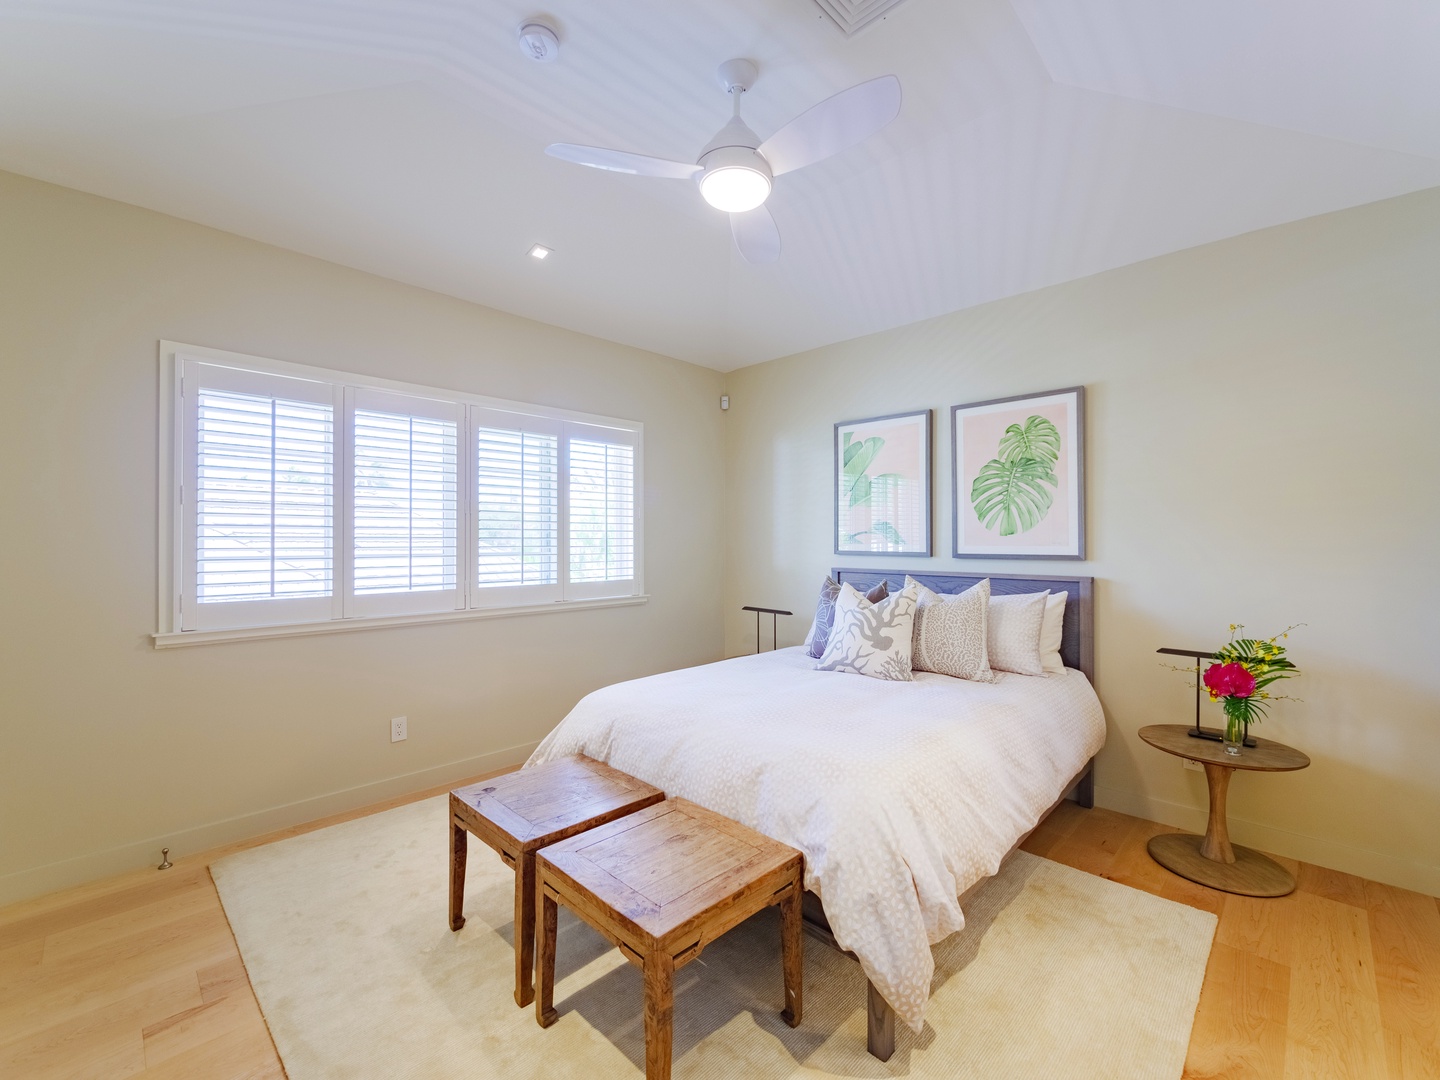 Honolulu Vacation Rentals, Paradise Beach Estate - Plush bed with natural lighting for the fourth bedroom